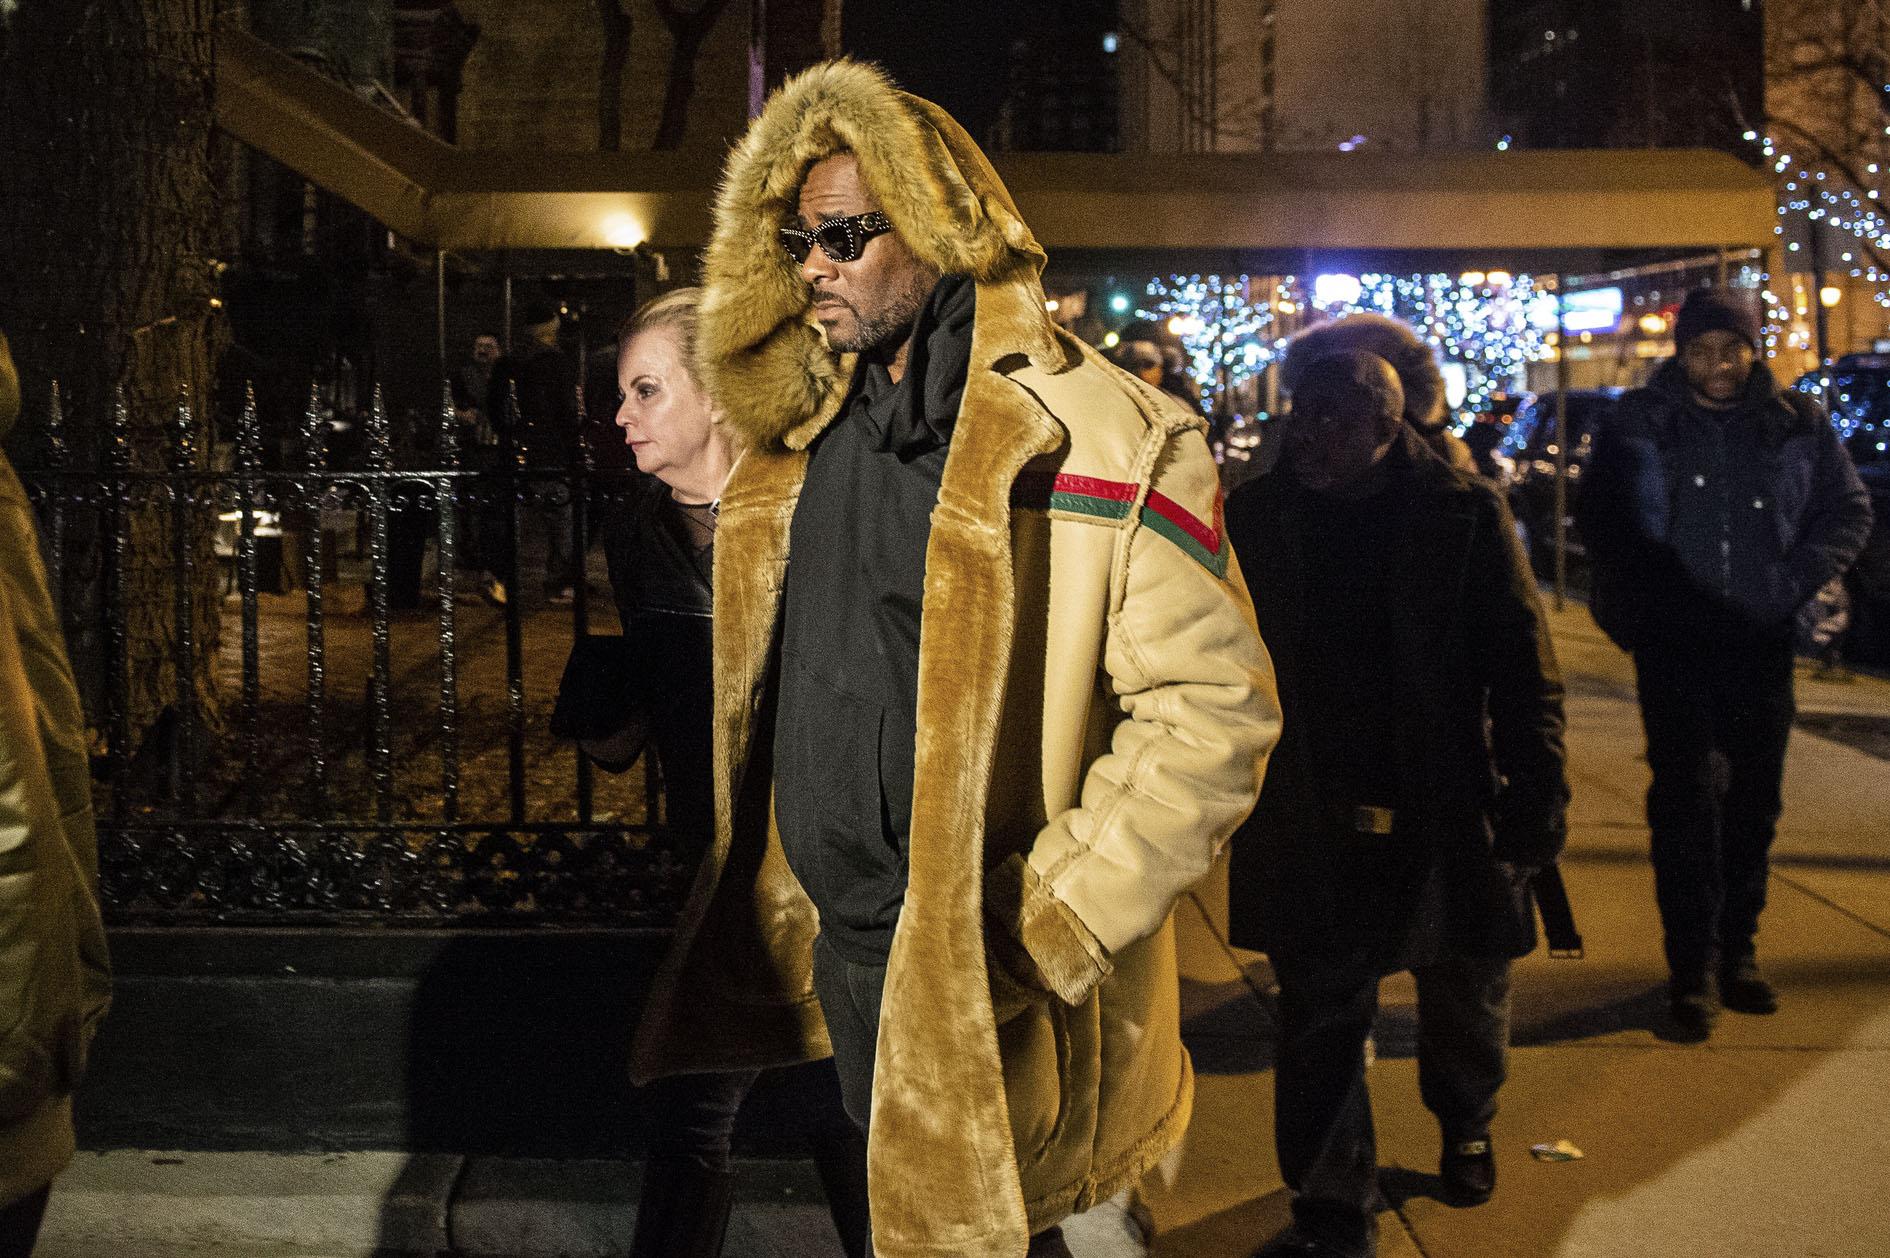 R. Kelly walks to his vehicle after exiting a cigar lounge in Chicago on Monday, Feb. 25, 2019.  A suburban Chicago woman posted the $100,000 bail for R. Kelly to be freed from jail while he awaits trial on sexual abuse charges.  (Tyler LaRiviere / Chicago Sun-Times via AP)